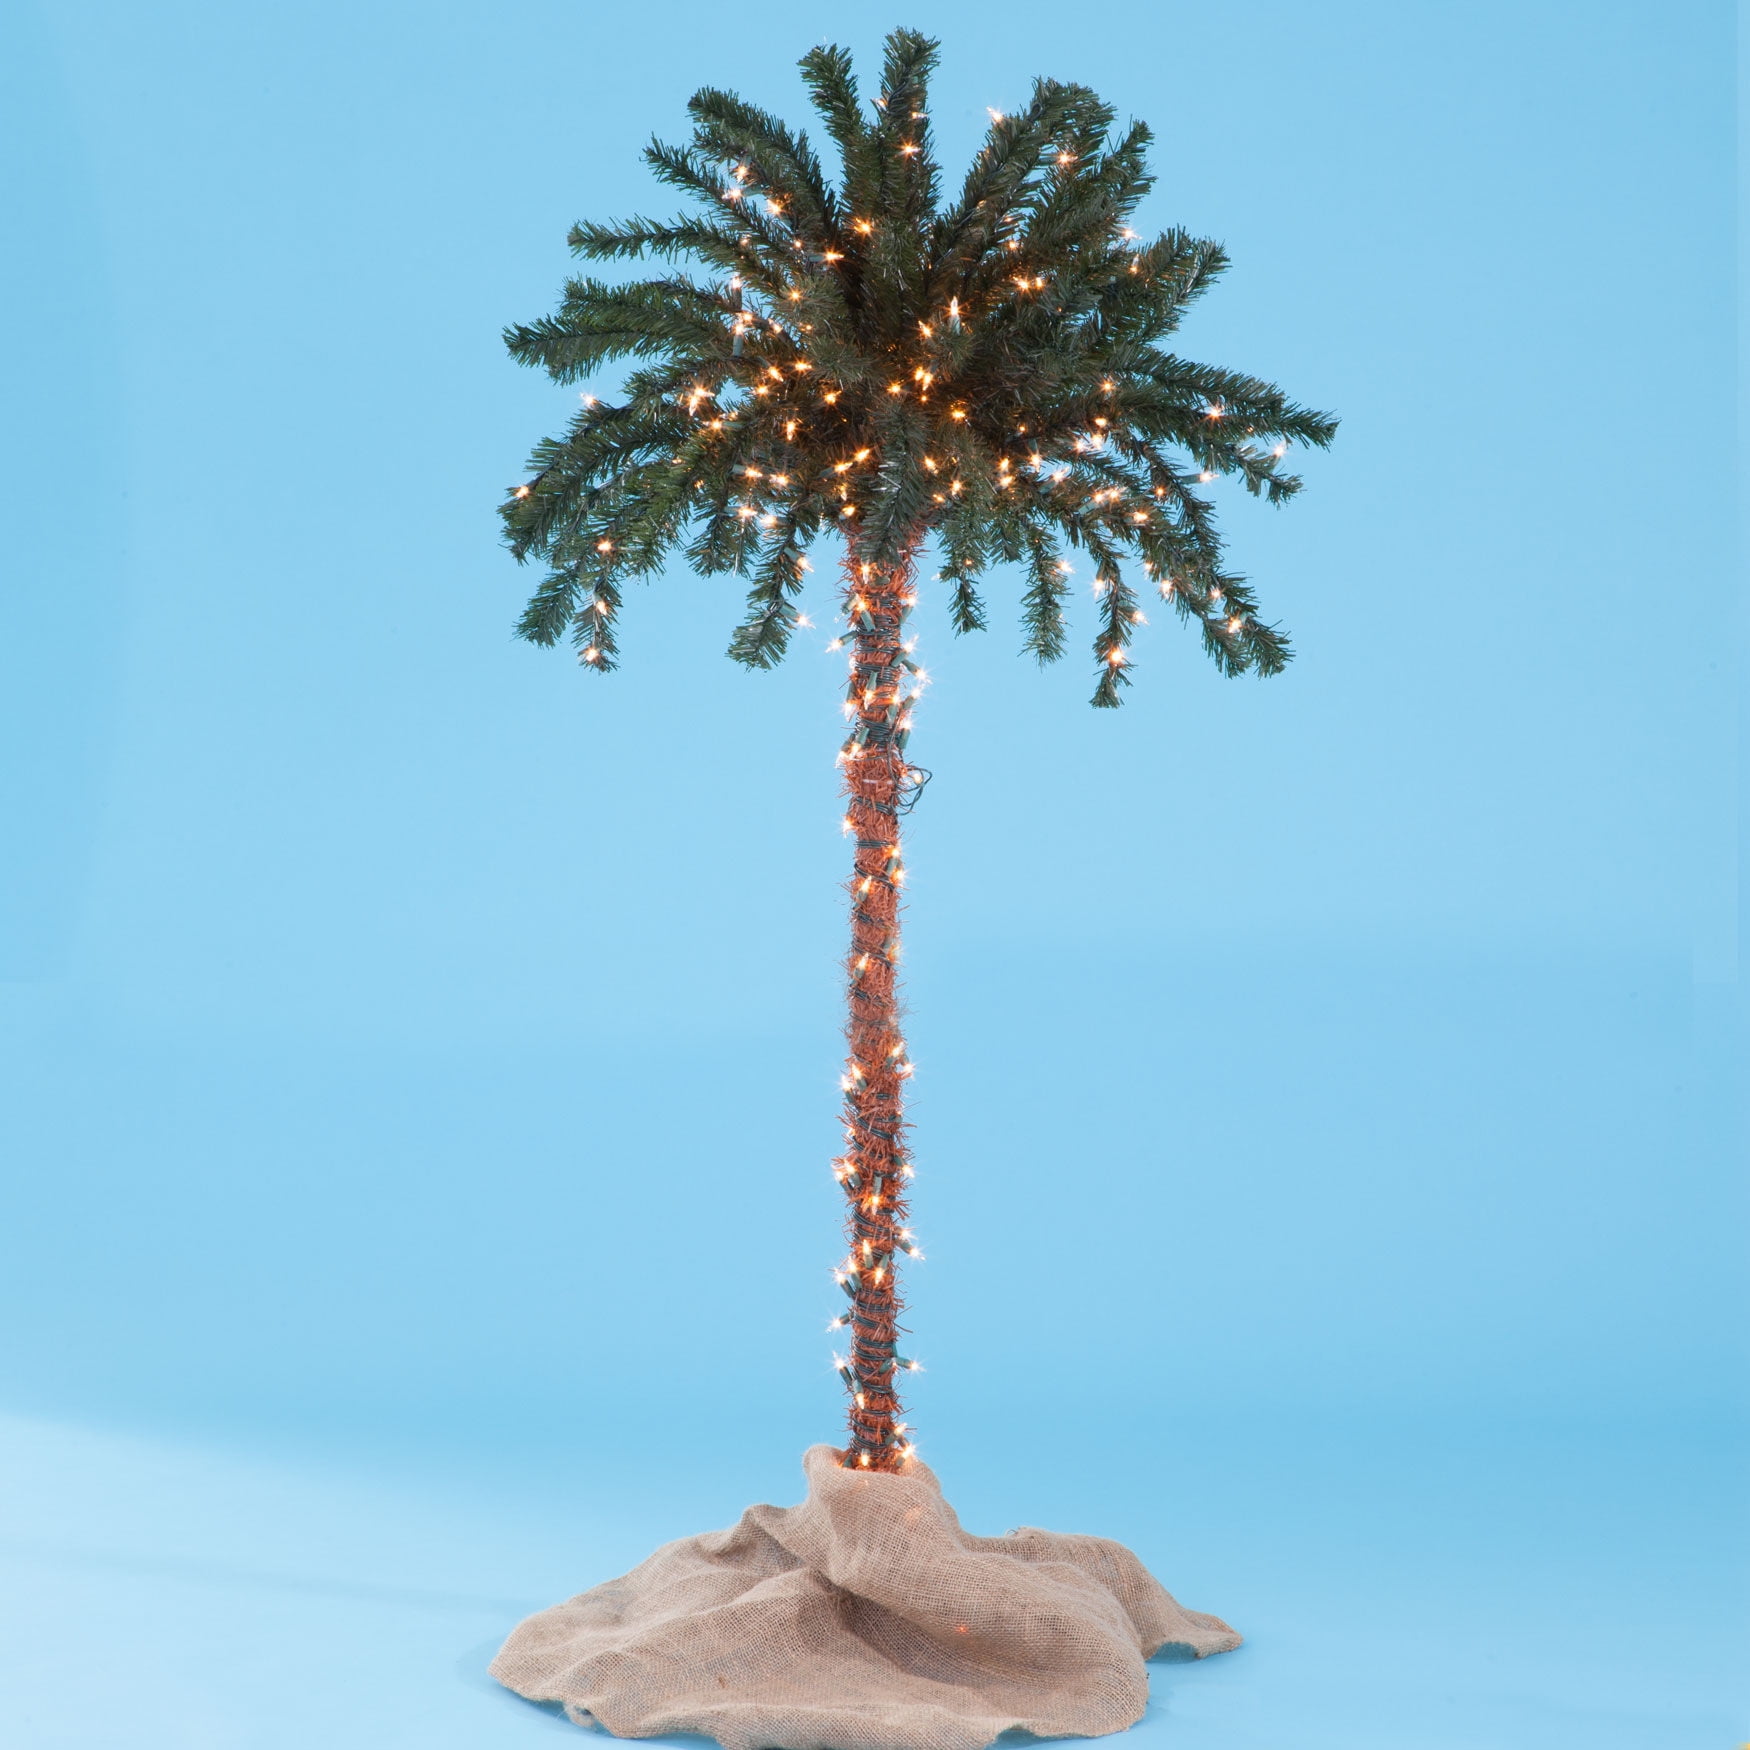 Kringle Traditions 10 Function LED Lighted Palm Tree Remoted Controlled with Timer 7 Ft Wintergreen Lighting Pre-Lit Palm Tree Indoor/Outdoor